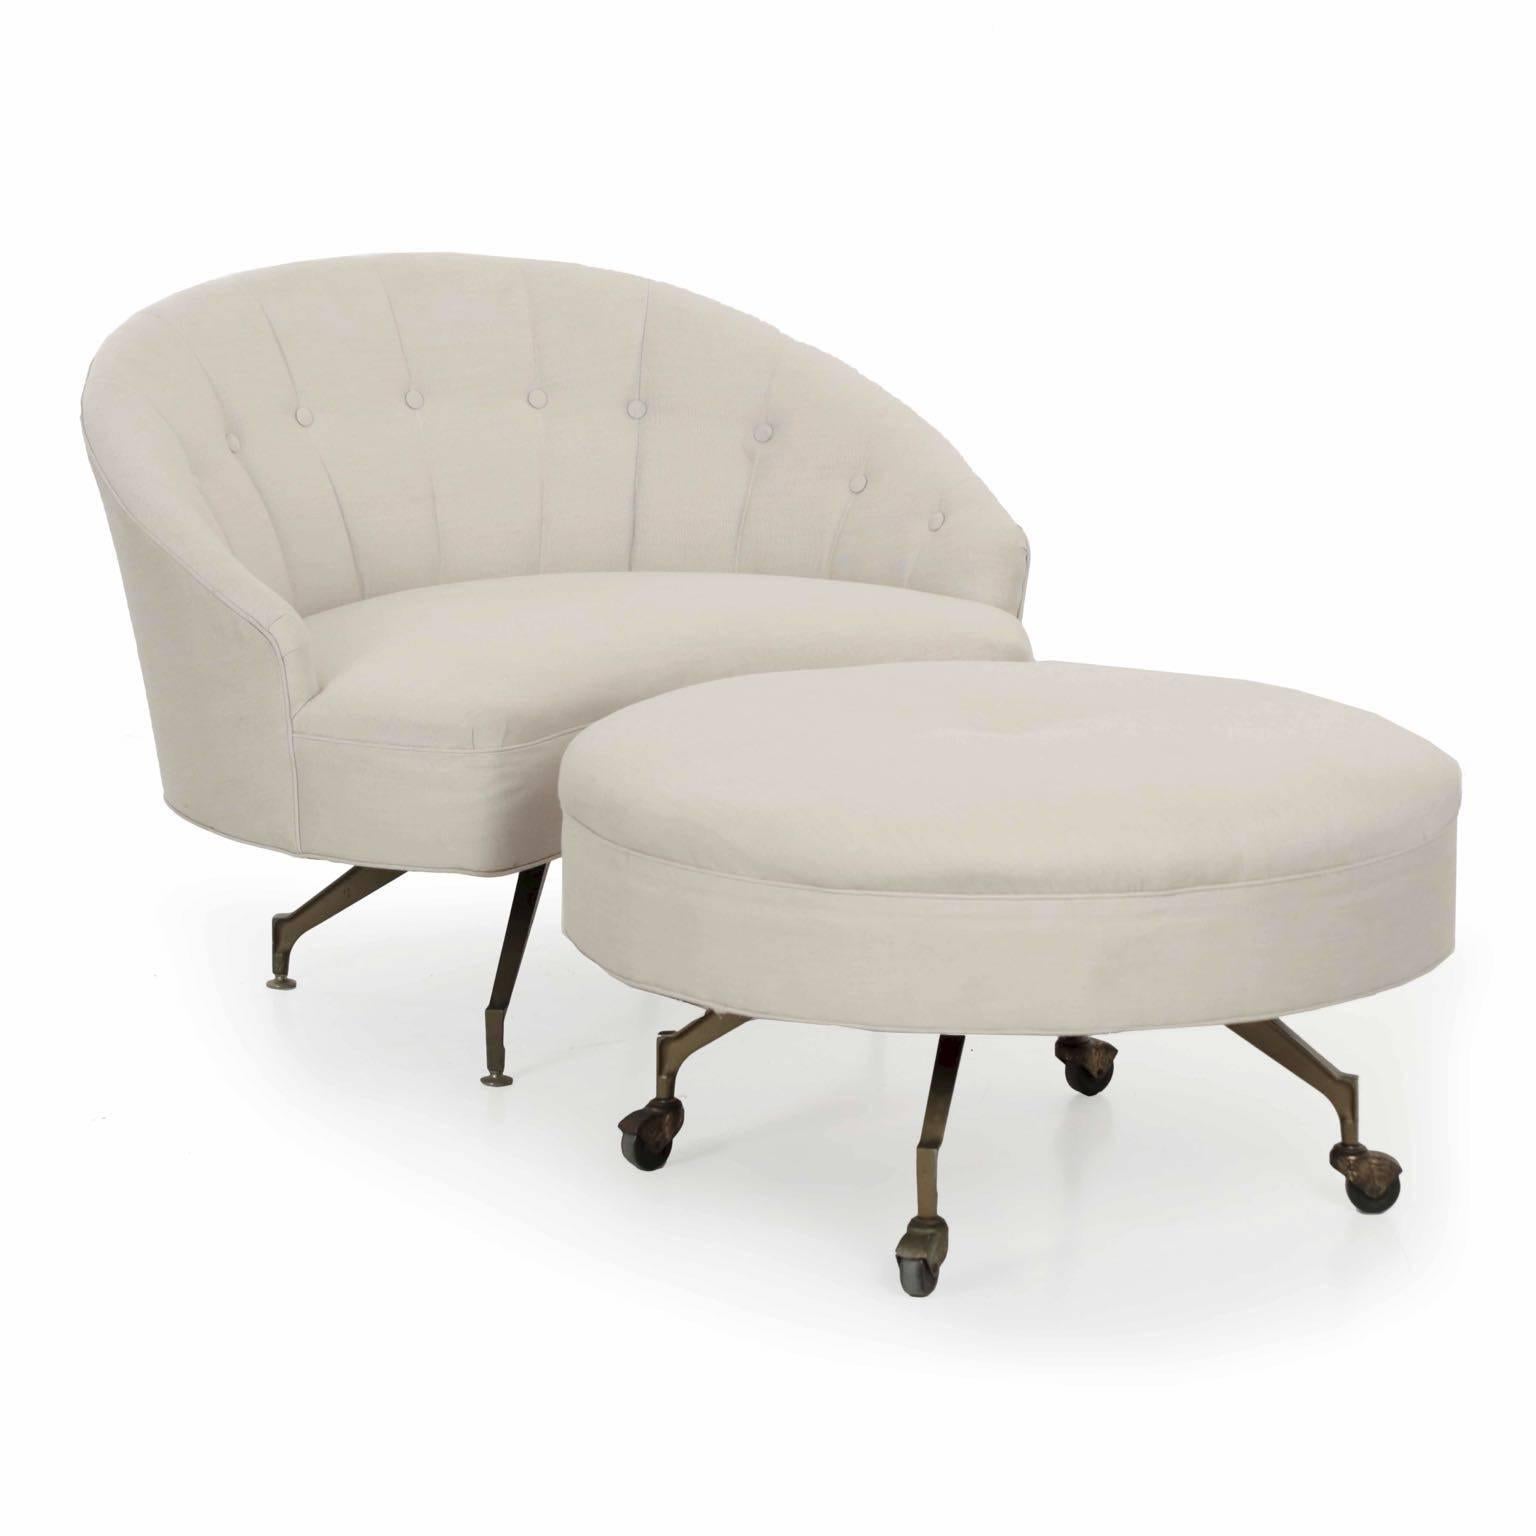 A striking vintage chaise lounge with a roll-away ottoman, the chair is beautifully tufted with a neutral woven linen fabric, both the ottoman and chair deeply stuffed for comfort and support. The chair rests over angle-iron legs, the ottoman with